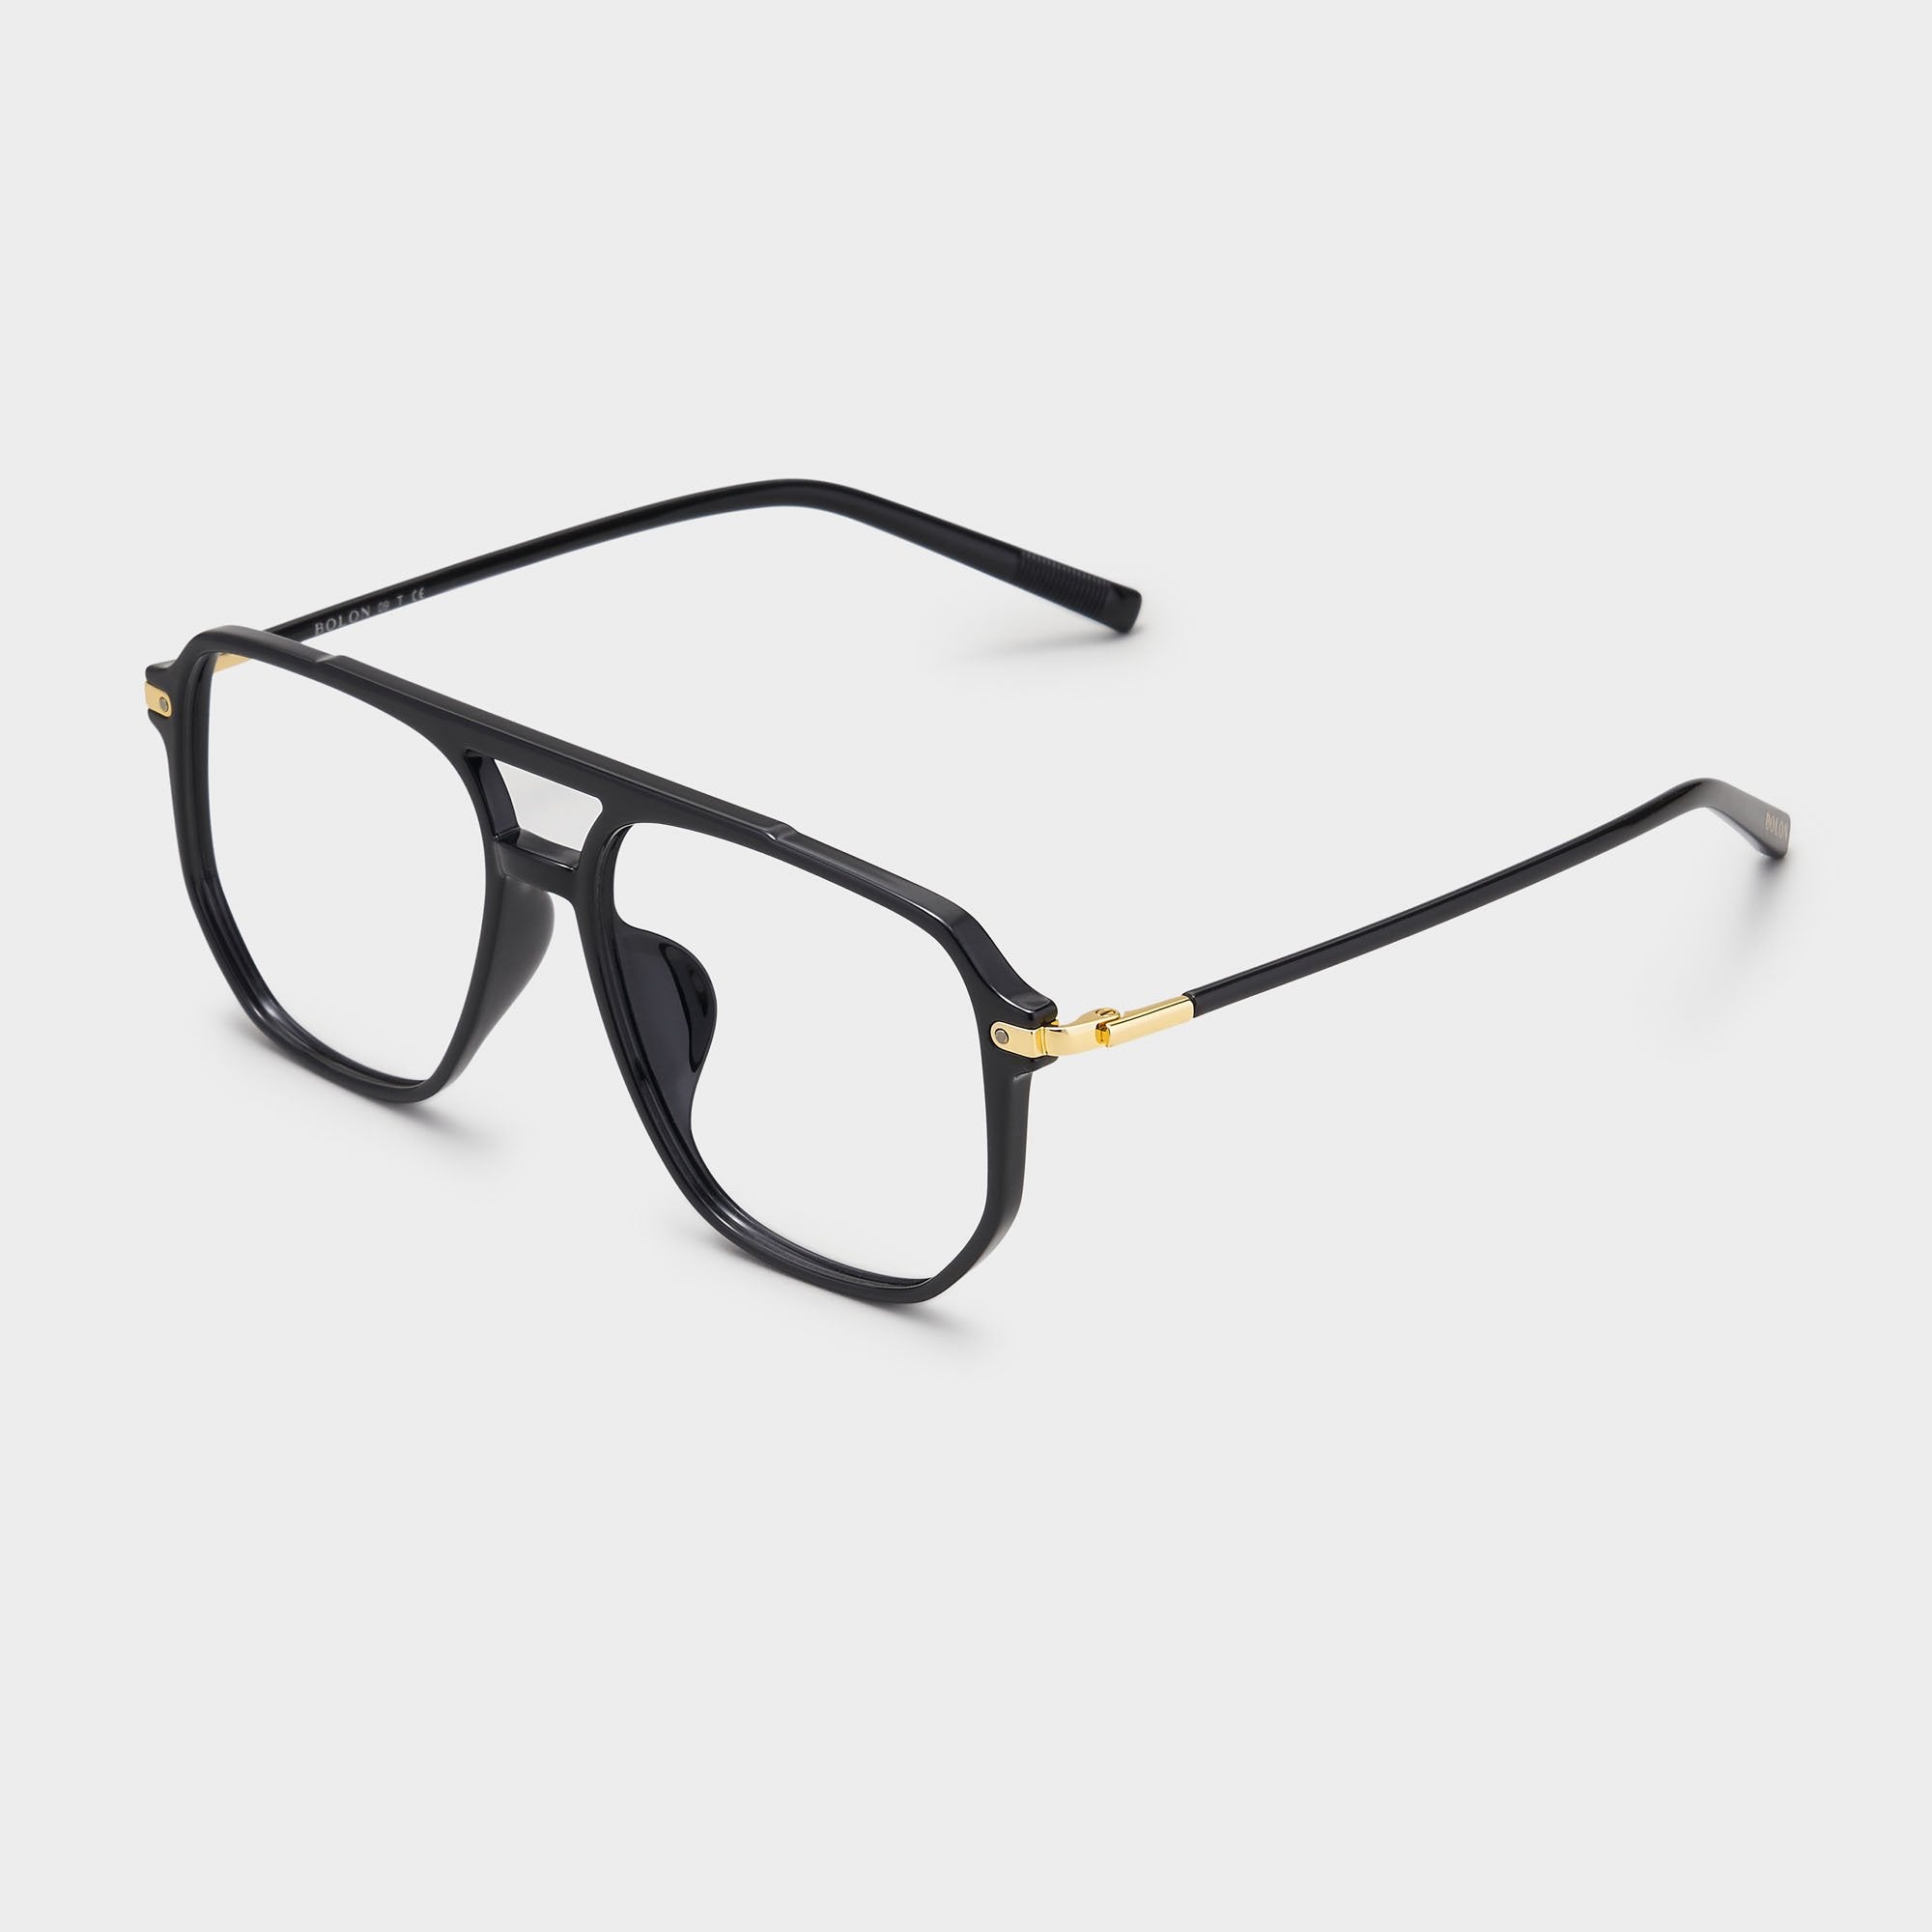 Black with gold temples